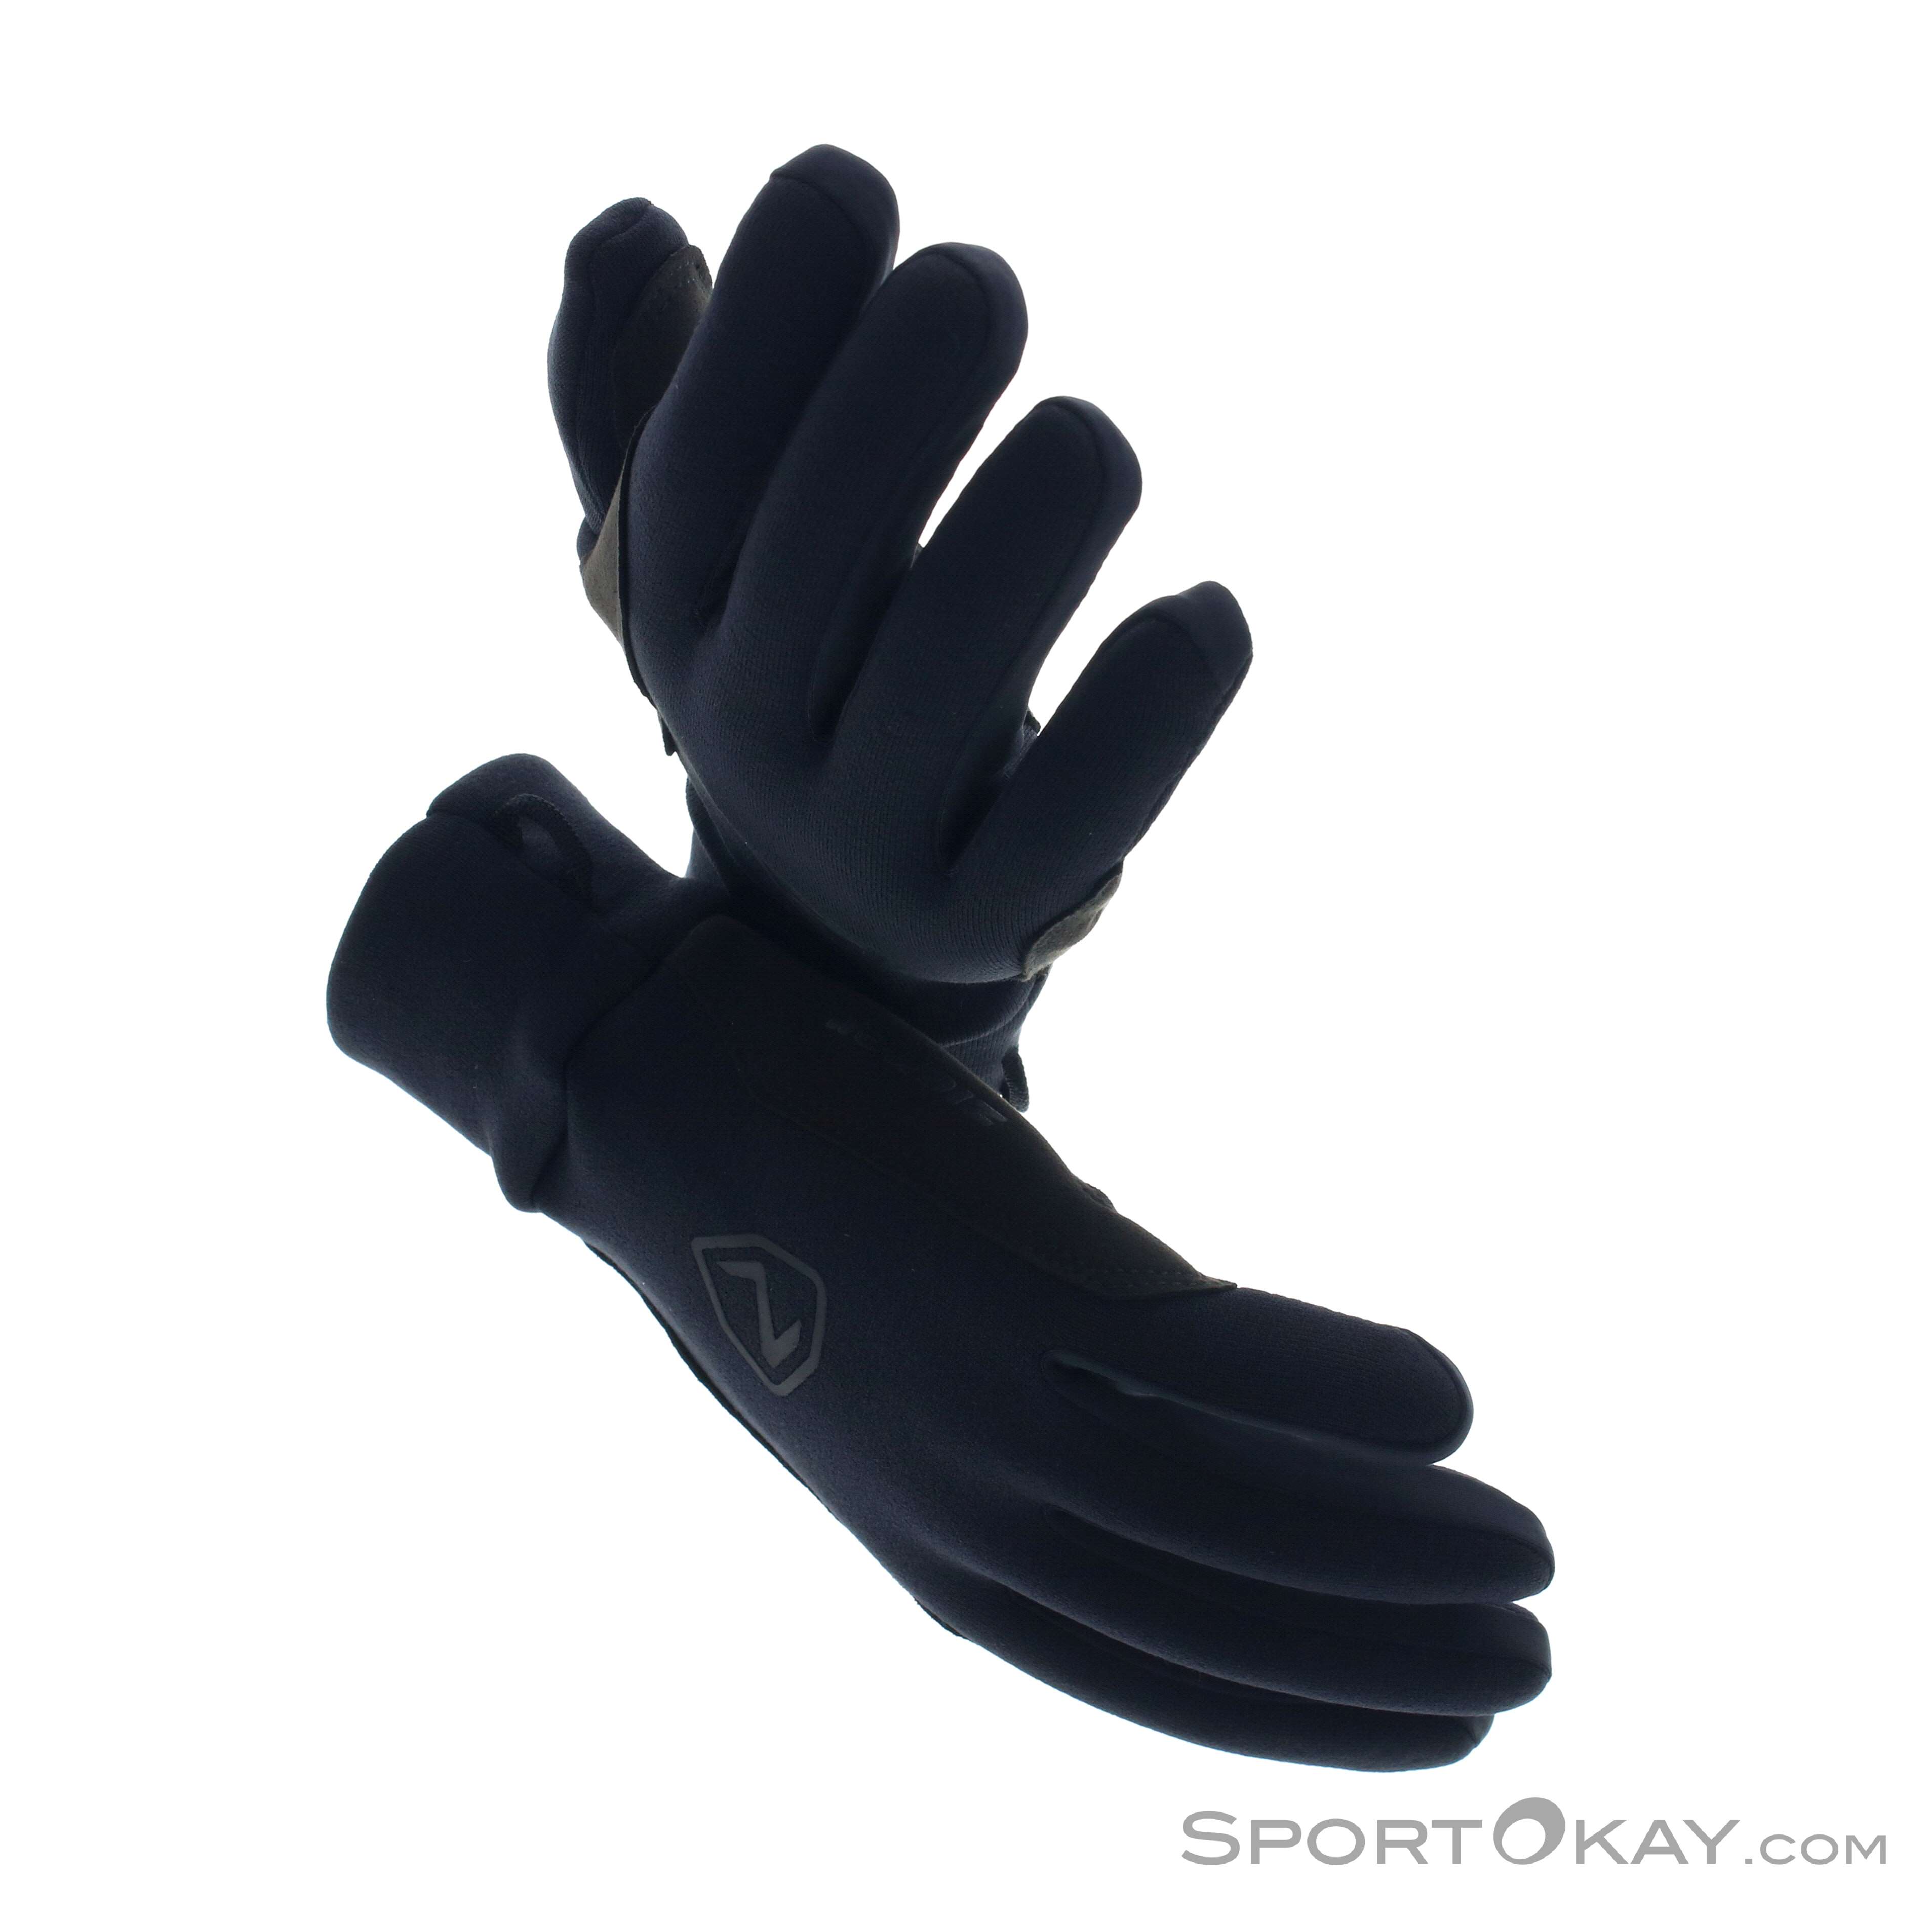 Ziener Gusty Touch Gloves Outdoor - Gloves - Clothing - Outdoor - All